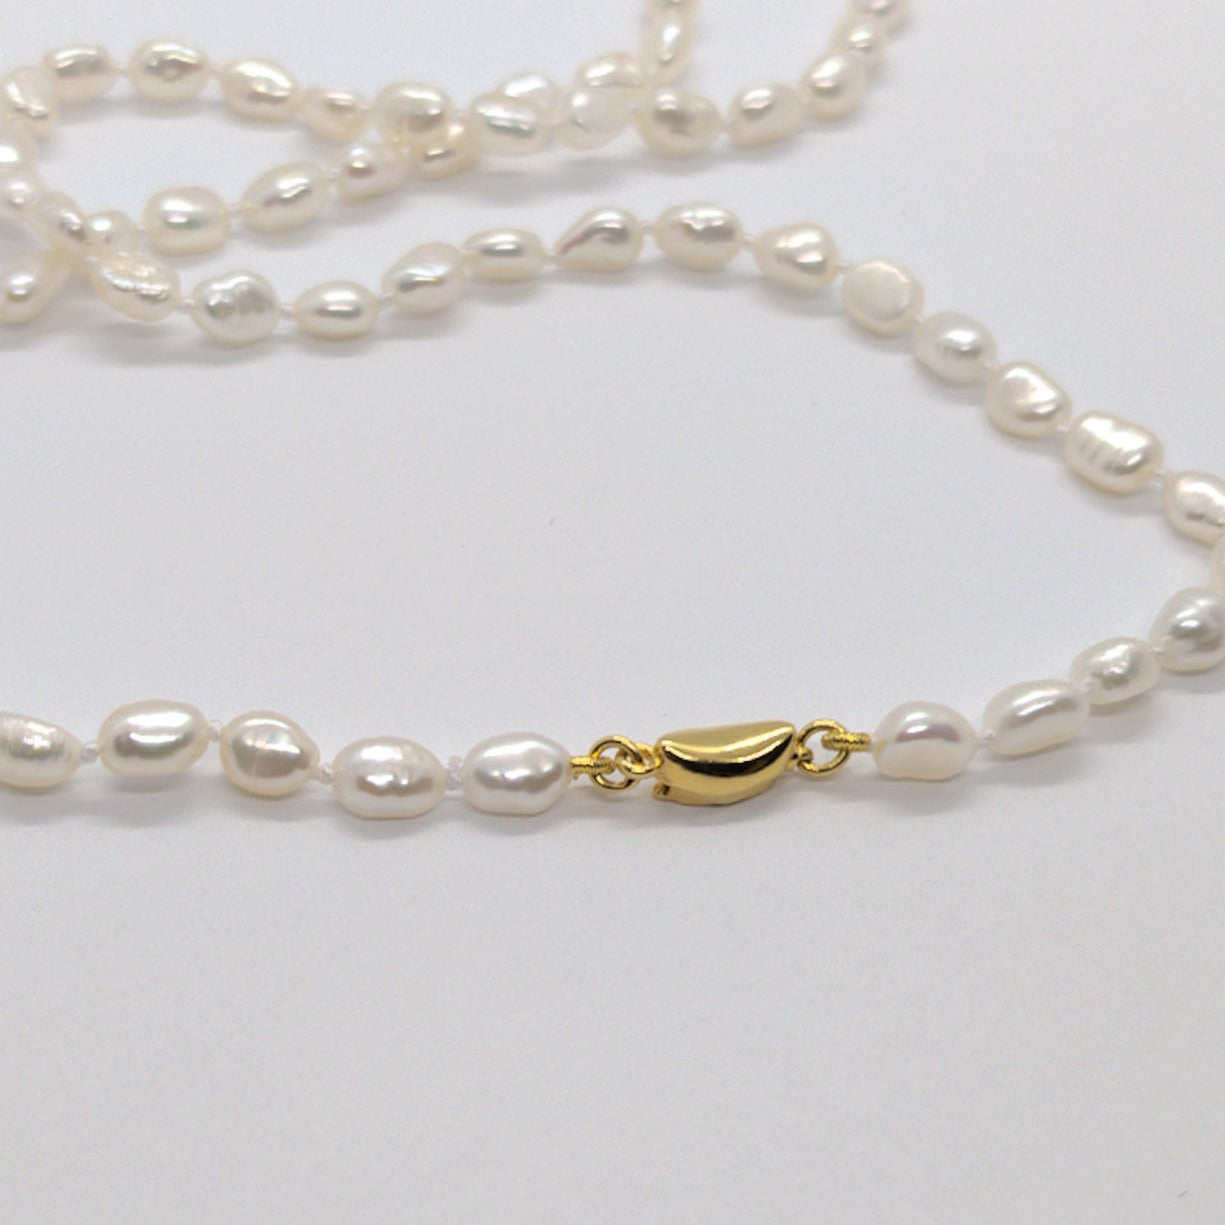 Keshi Pearl Pendant: A Timeless Expression of Elegance, by sanjay jain